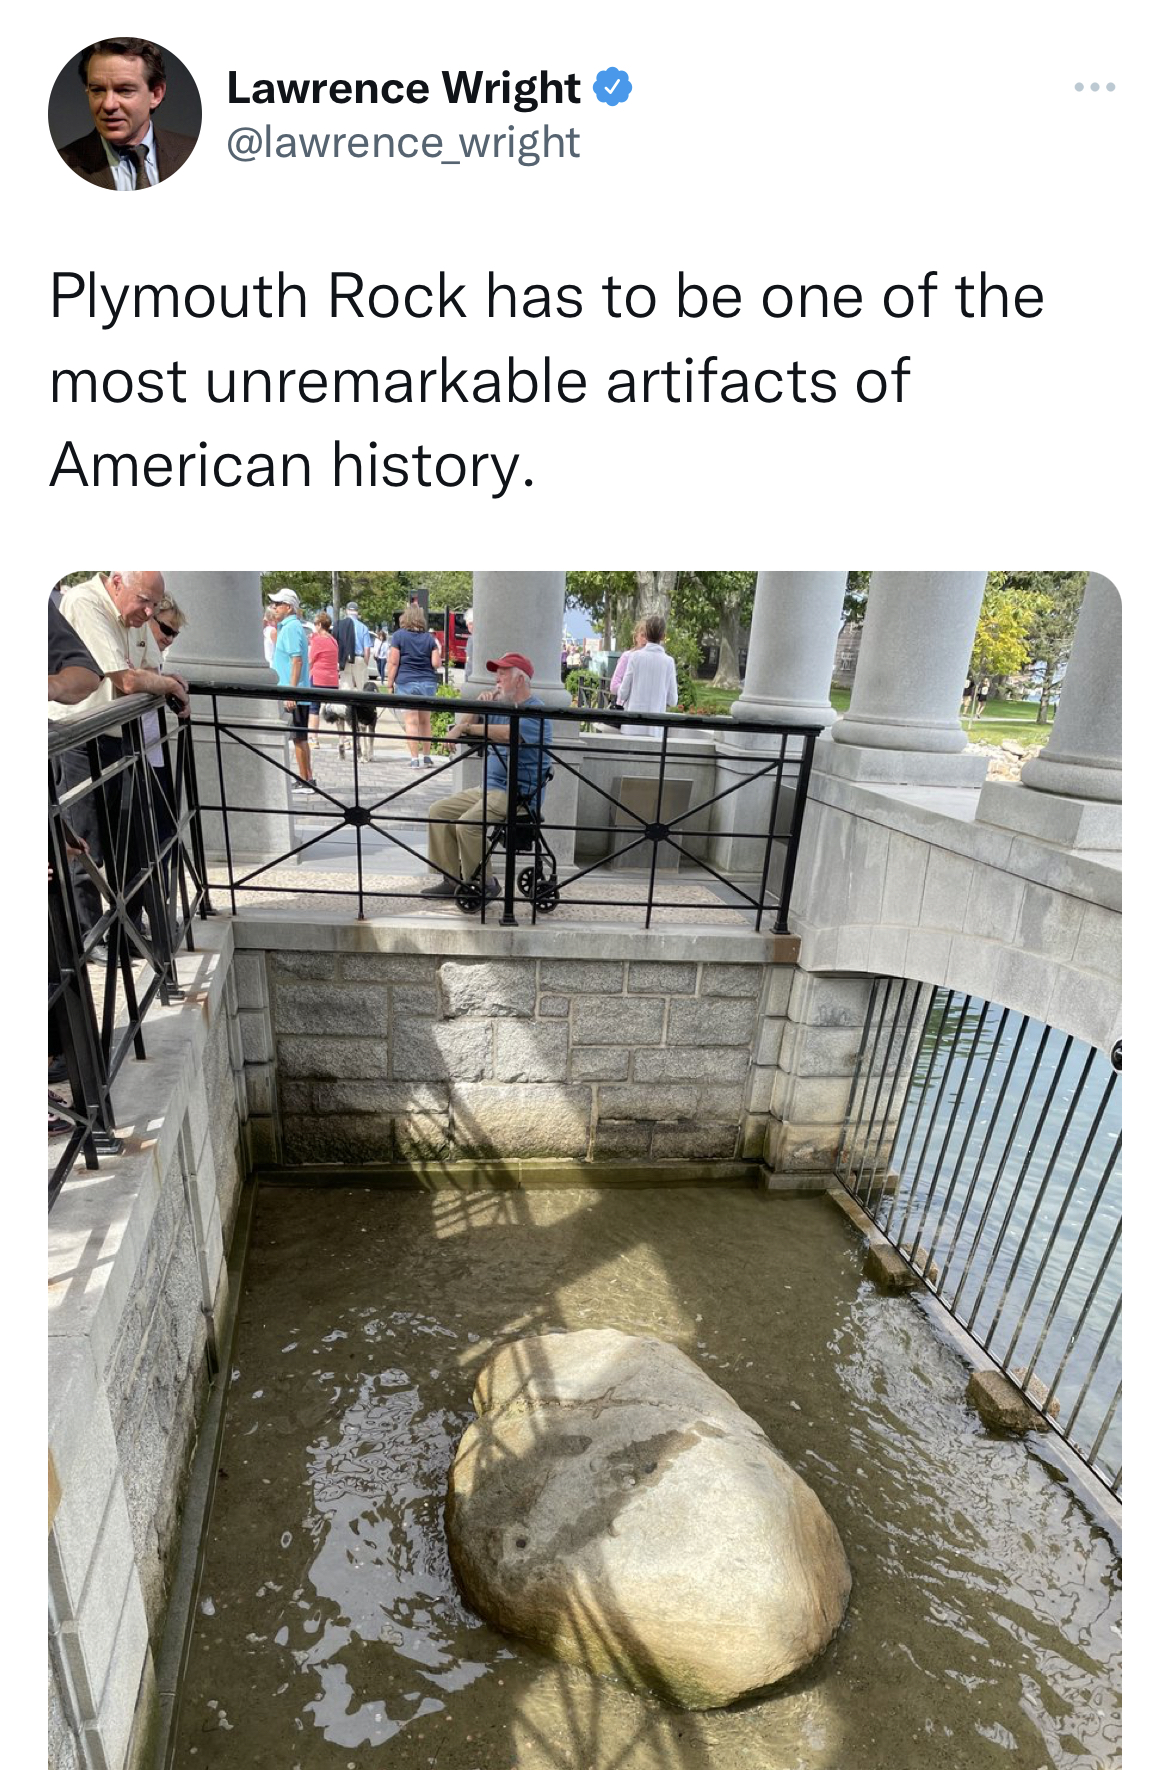 Fresh Daily Tweets - water resources - Lawrence Wright Plymouth Rock has to be one of the most unremarkable artifacts of American history.